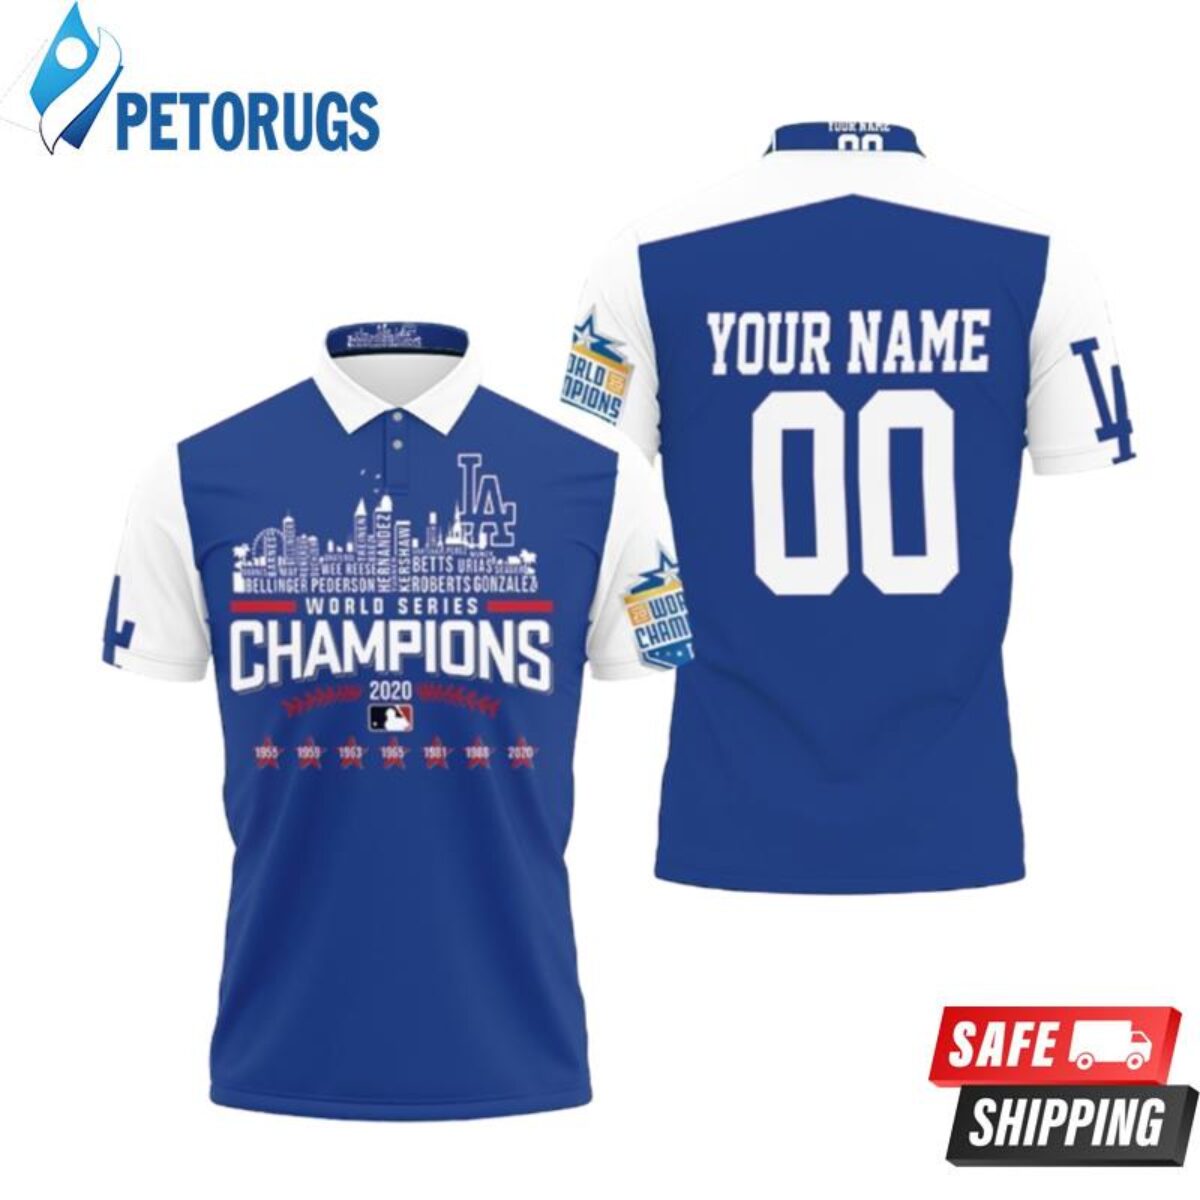 Los Angeles Dodgers Team Name World Series Champions Personalized Polo  Shirts - Peto Rugs